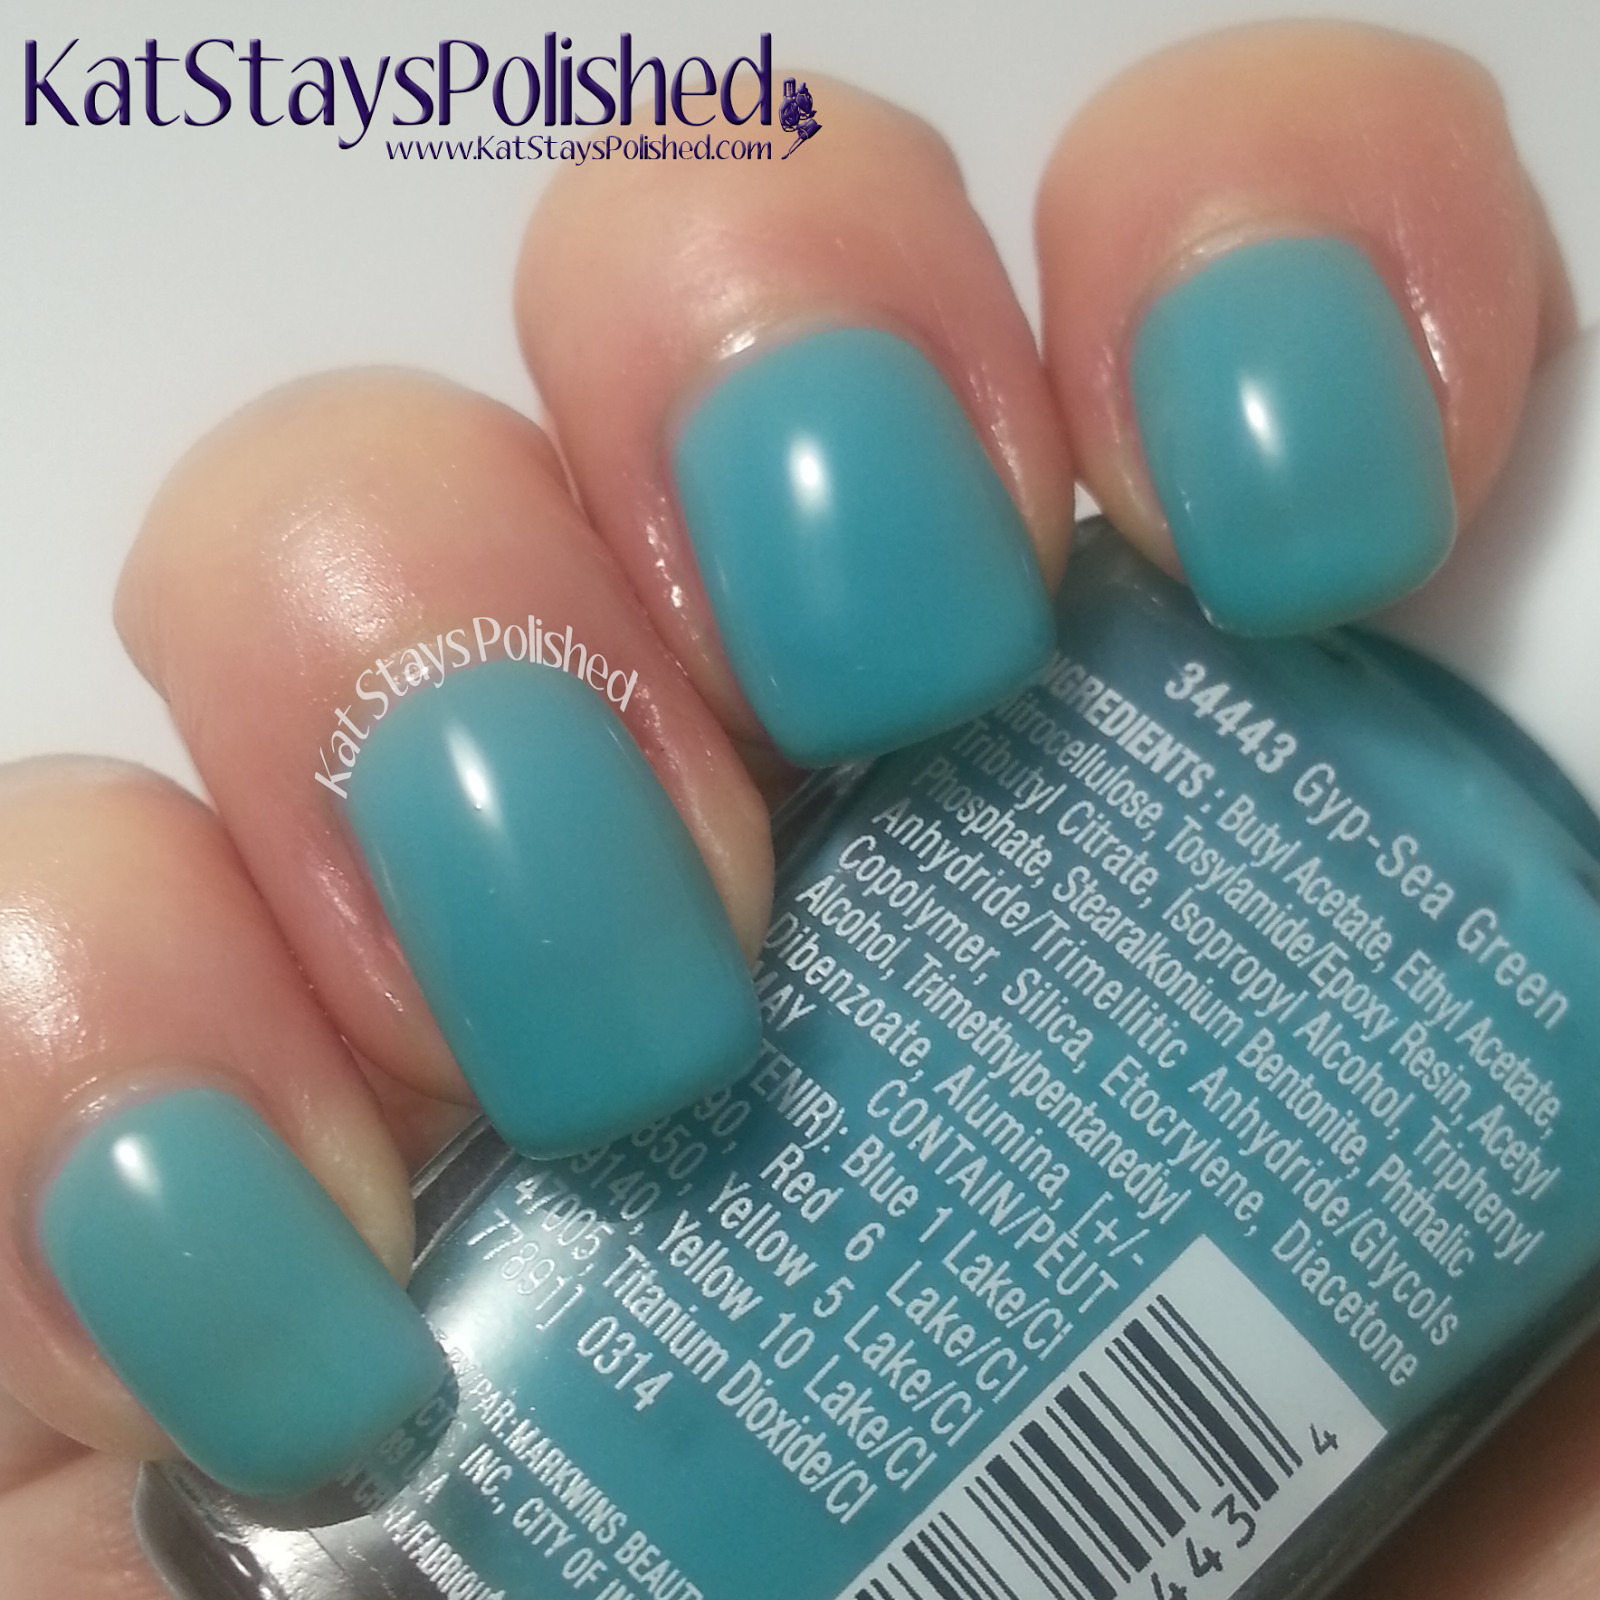 Wet n Wild Summer Festival Nail Color - Gyp-Sea Green | Kat Stays Polished